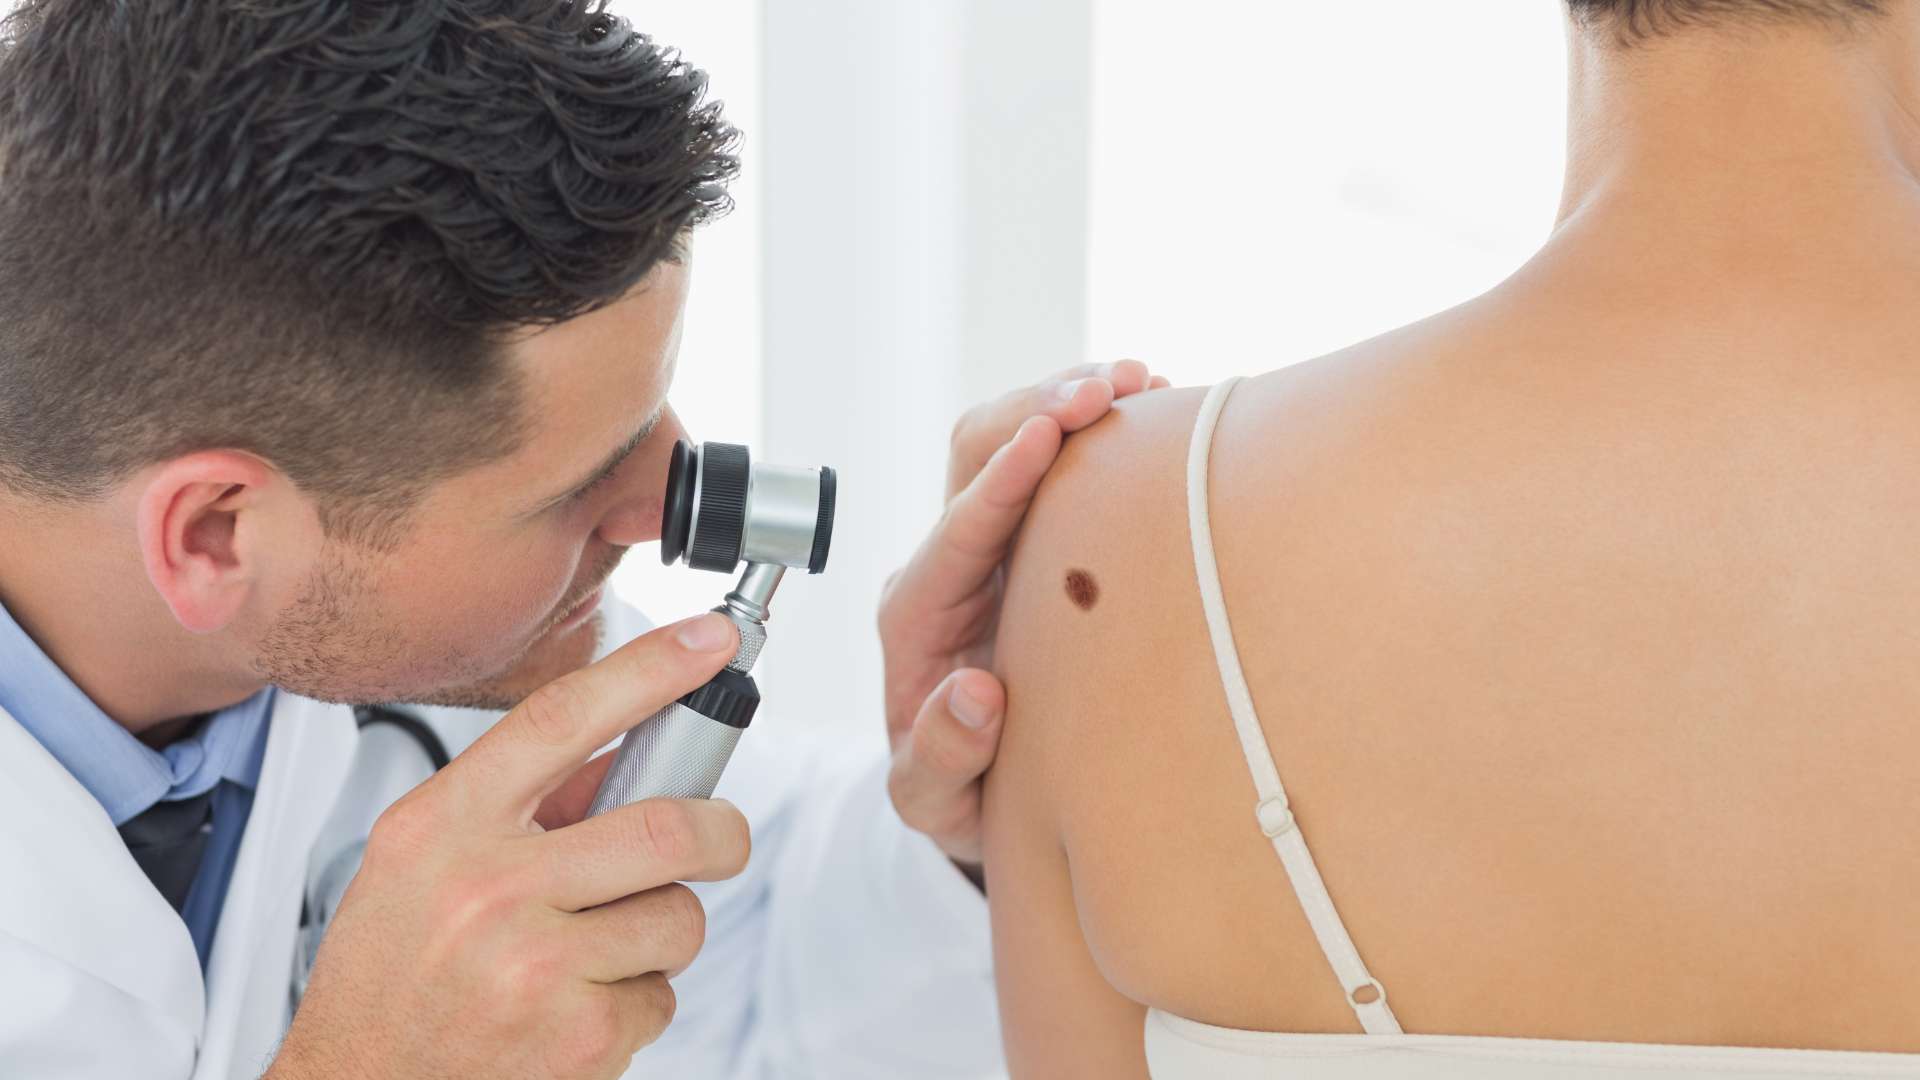 Medical dermatology is the treatment of skin conditions, such as acne scars, psoriasis, rosacea, hyperpigmentation, skin cancer, keloids, and cysts. The many different skin conditions people suffer all have their own causes and symptoms. Treatments are vary widely depending on the condition.